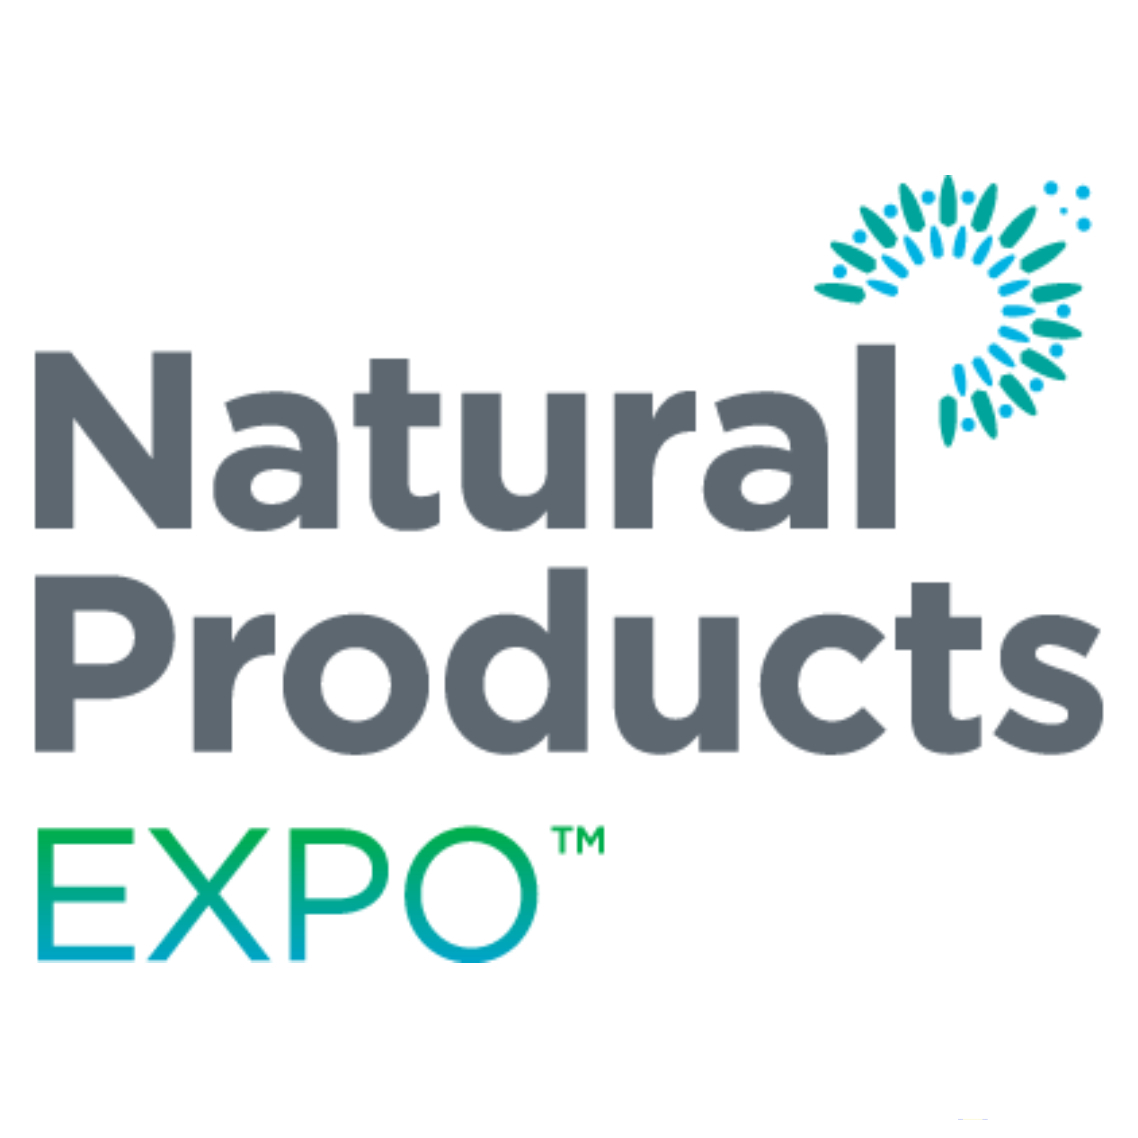 Natural Products Expo logo